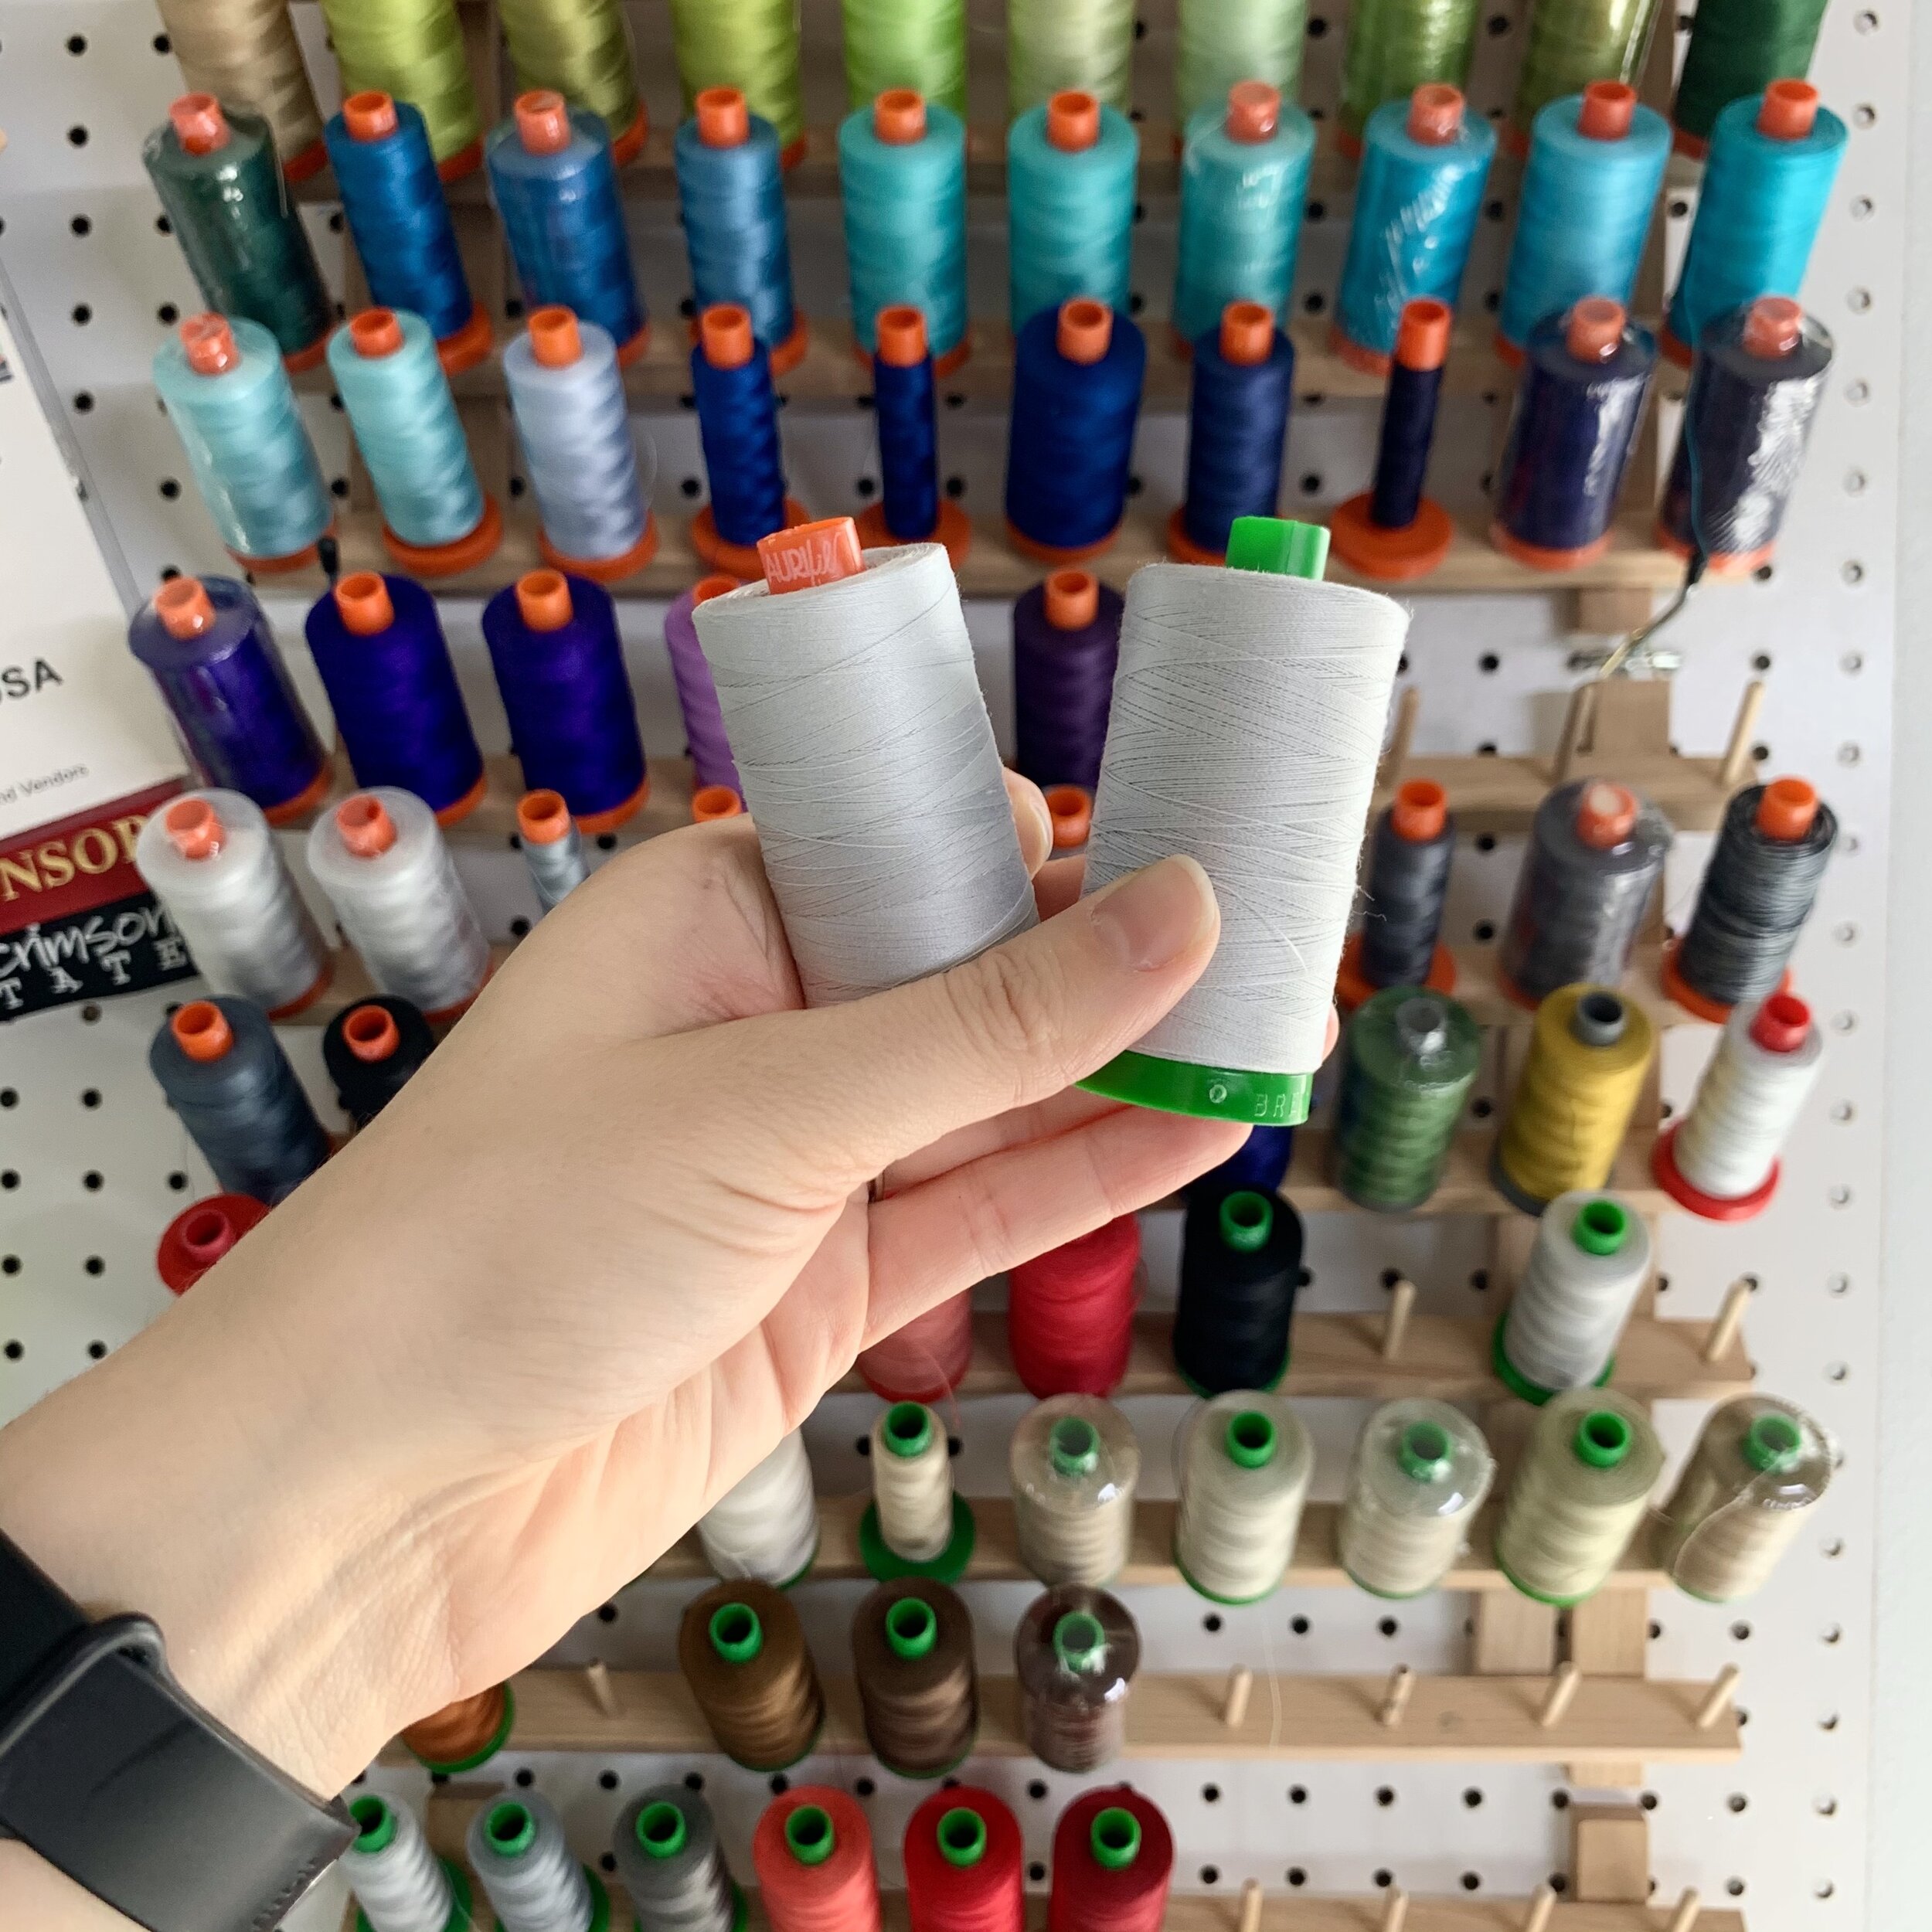 Aurifil Thread Weights For Quilting: Learn About the Different Types of  Aurifil Thread Weights and Uses - The Jolly Jabber Blog